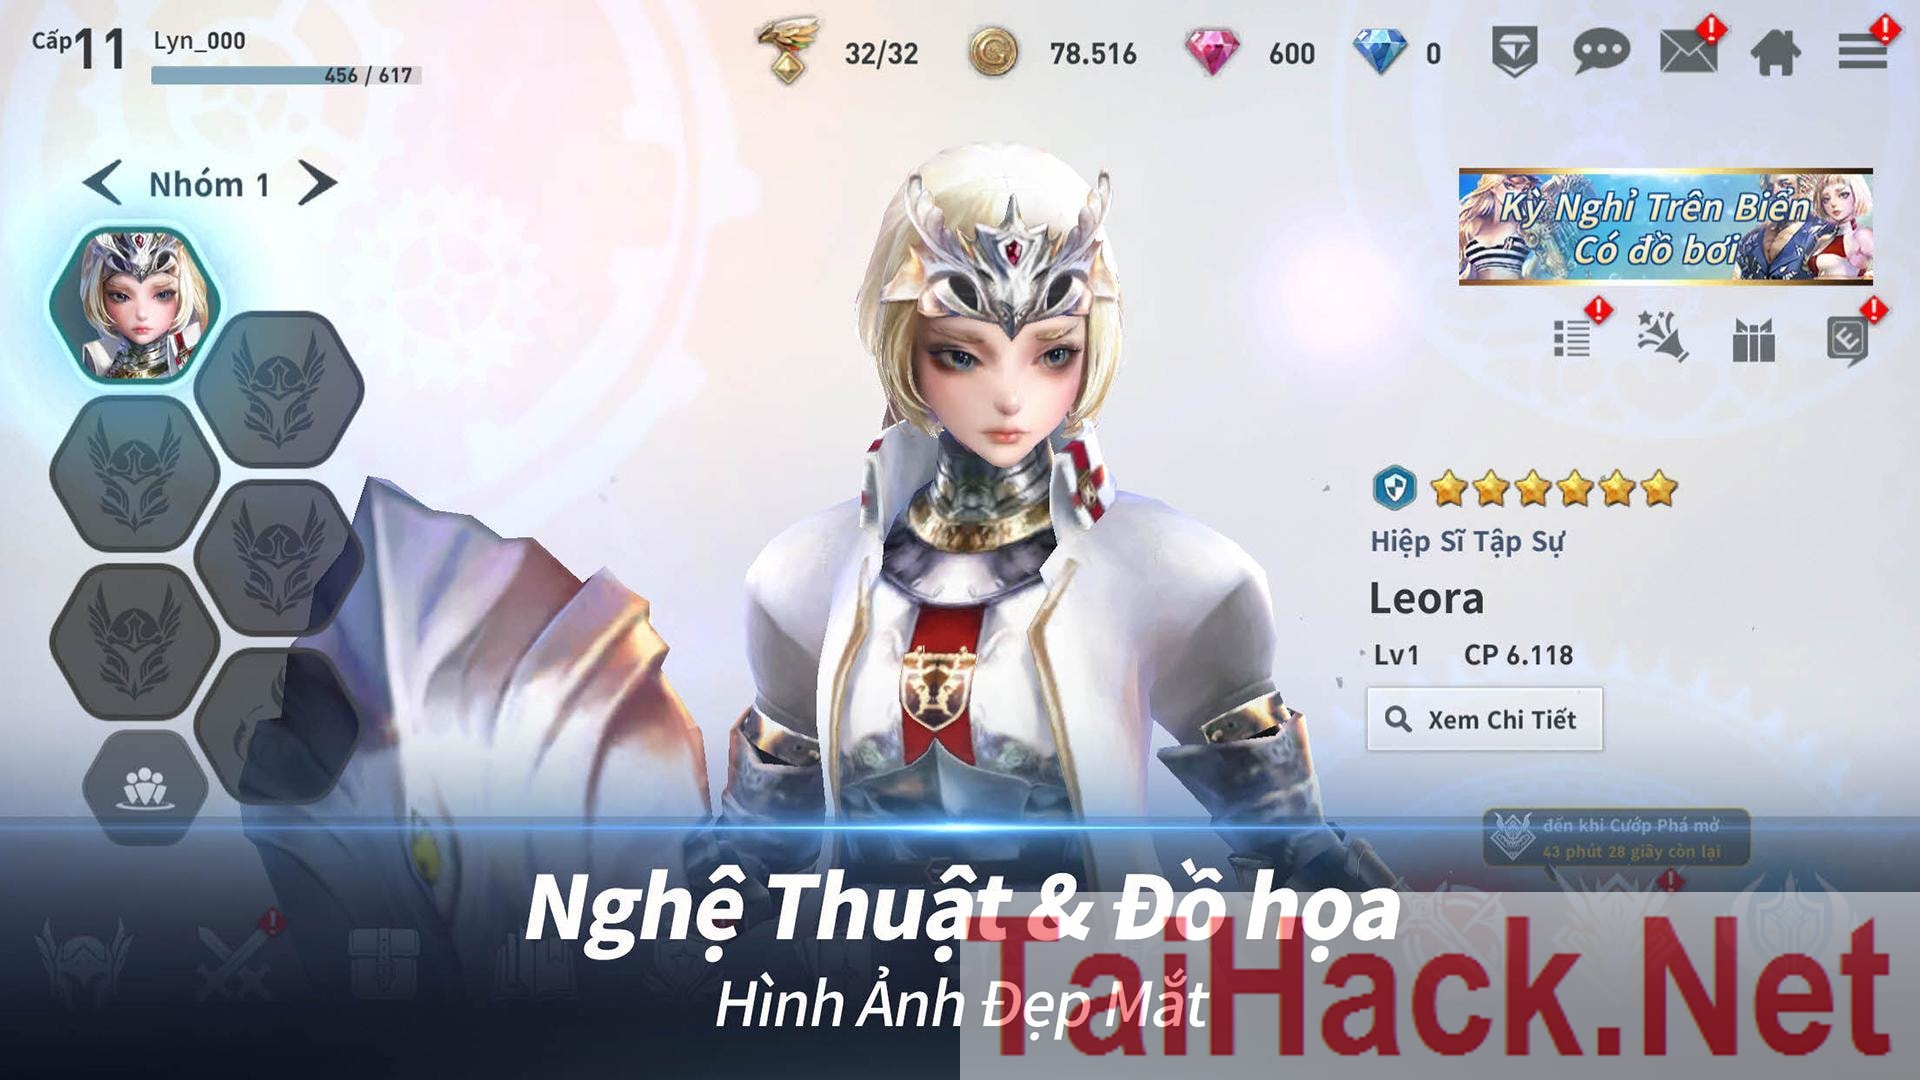 Download Hack New Version - LYN: The Lightbringer Hack Mod for iOS. This is the best action role-playing game of all time. In this hack, you can completely Menu mod, Damage multiple, and many other features are updated in this version. Download Game MOD IOS LYN: The Lightbringer Hack Mod for iOS free New Update